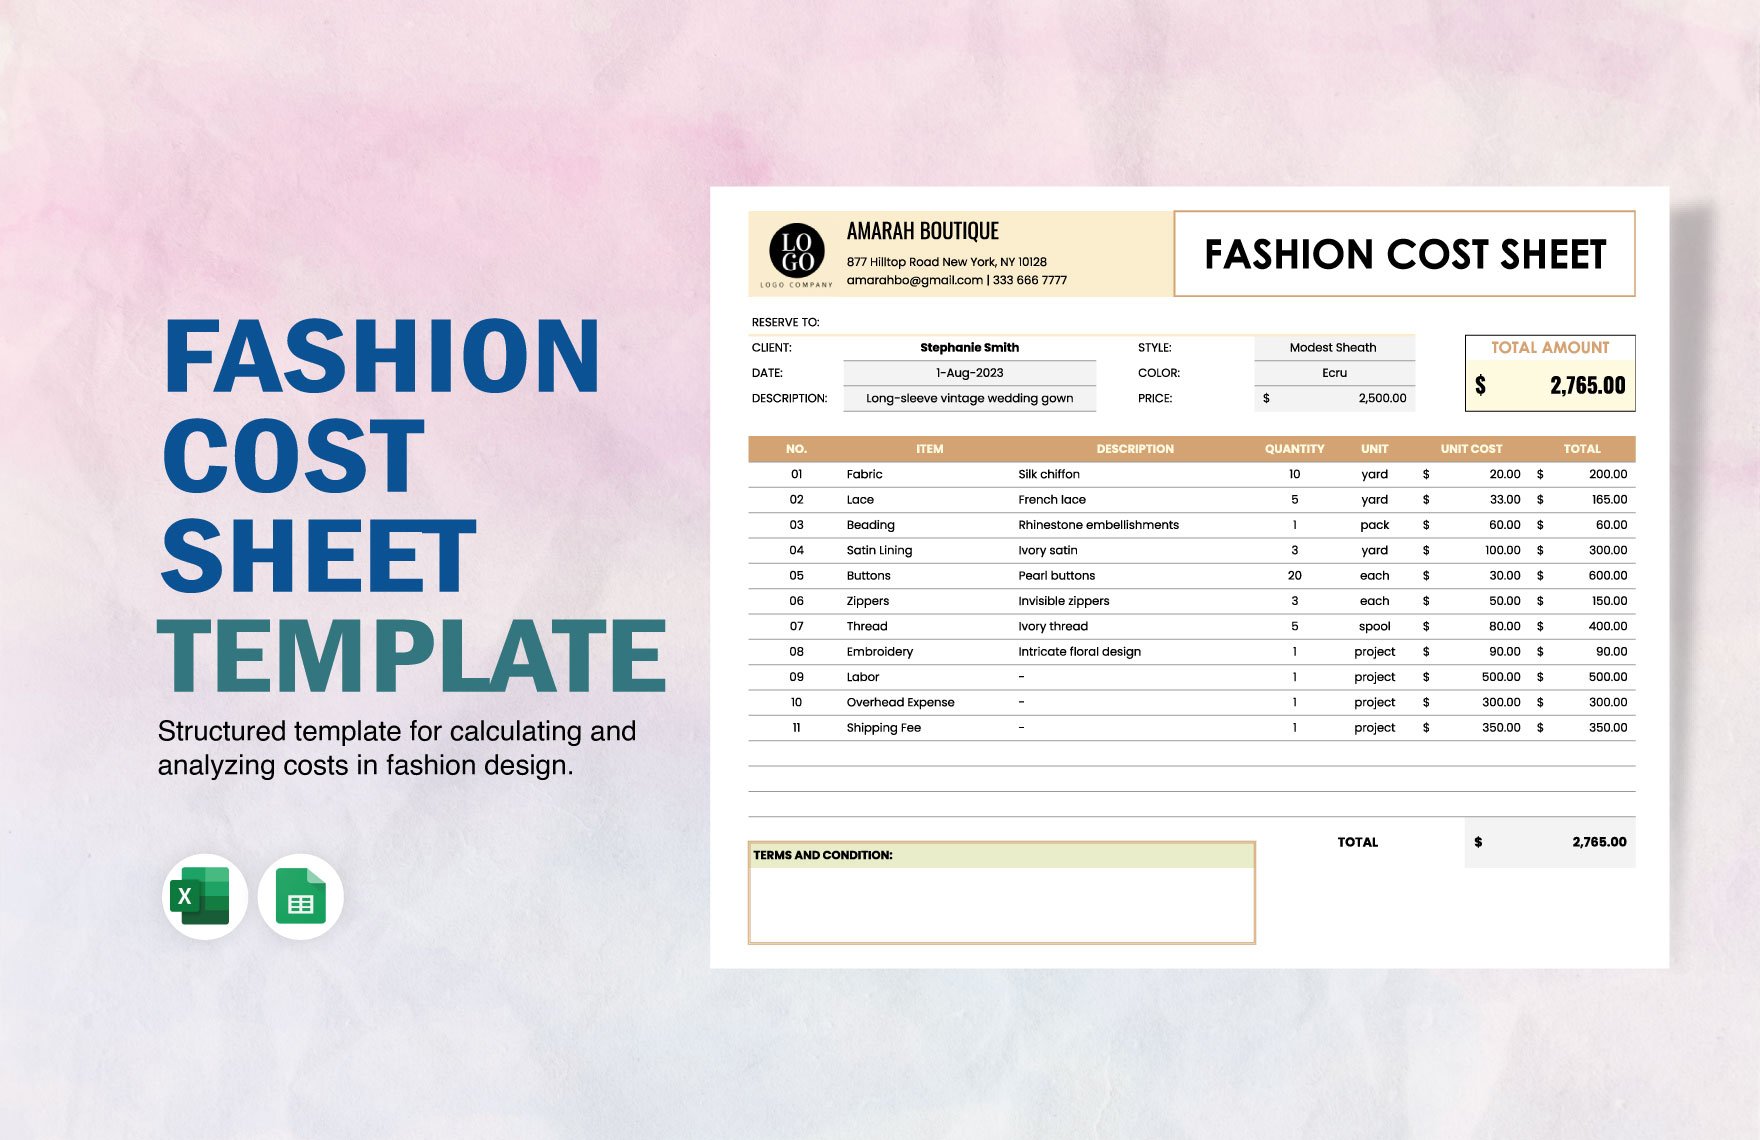 Fashion Cost Sheet Template in Excel, Google Sheets